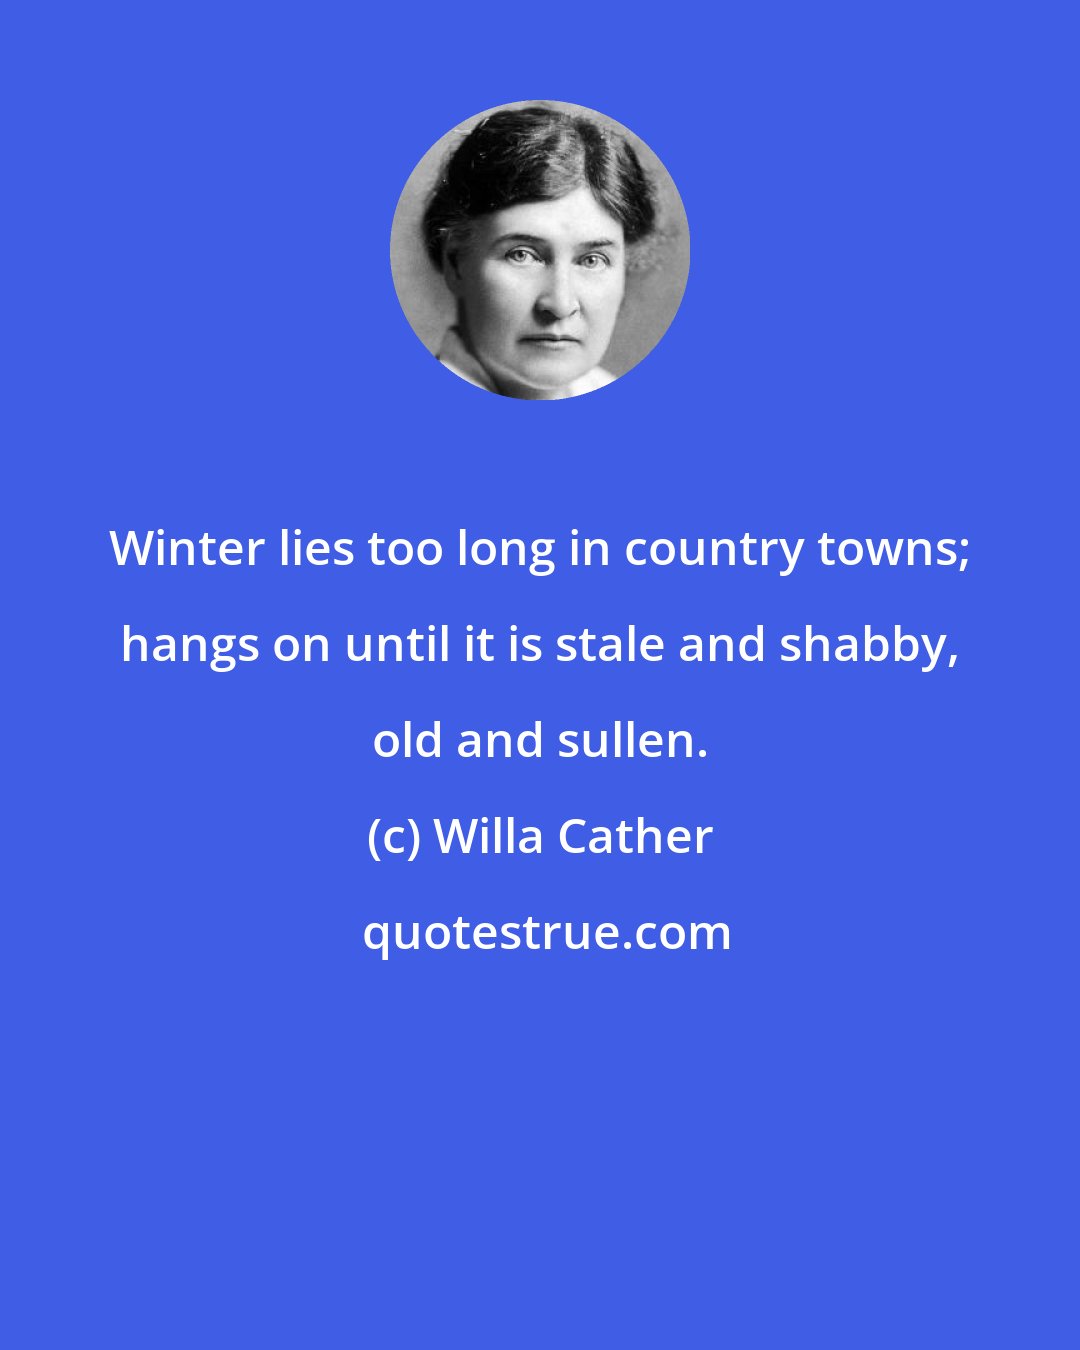 Willa Cather: Winter lies too long in country towns; hangs on until it is stale and shabby, old and sullen.